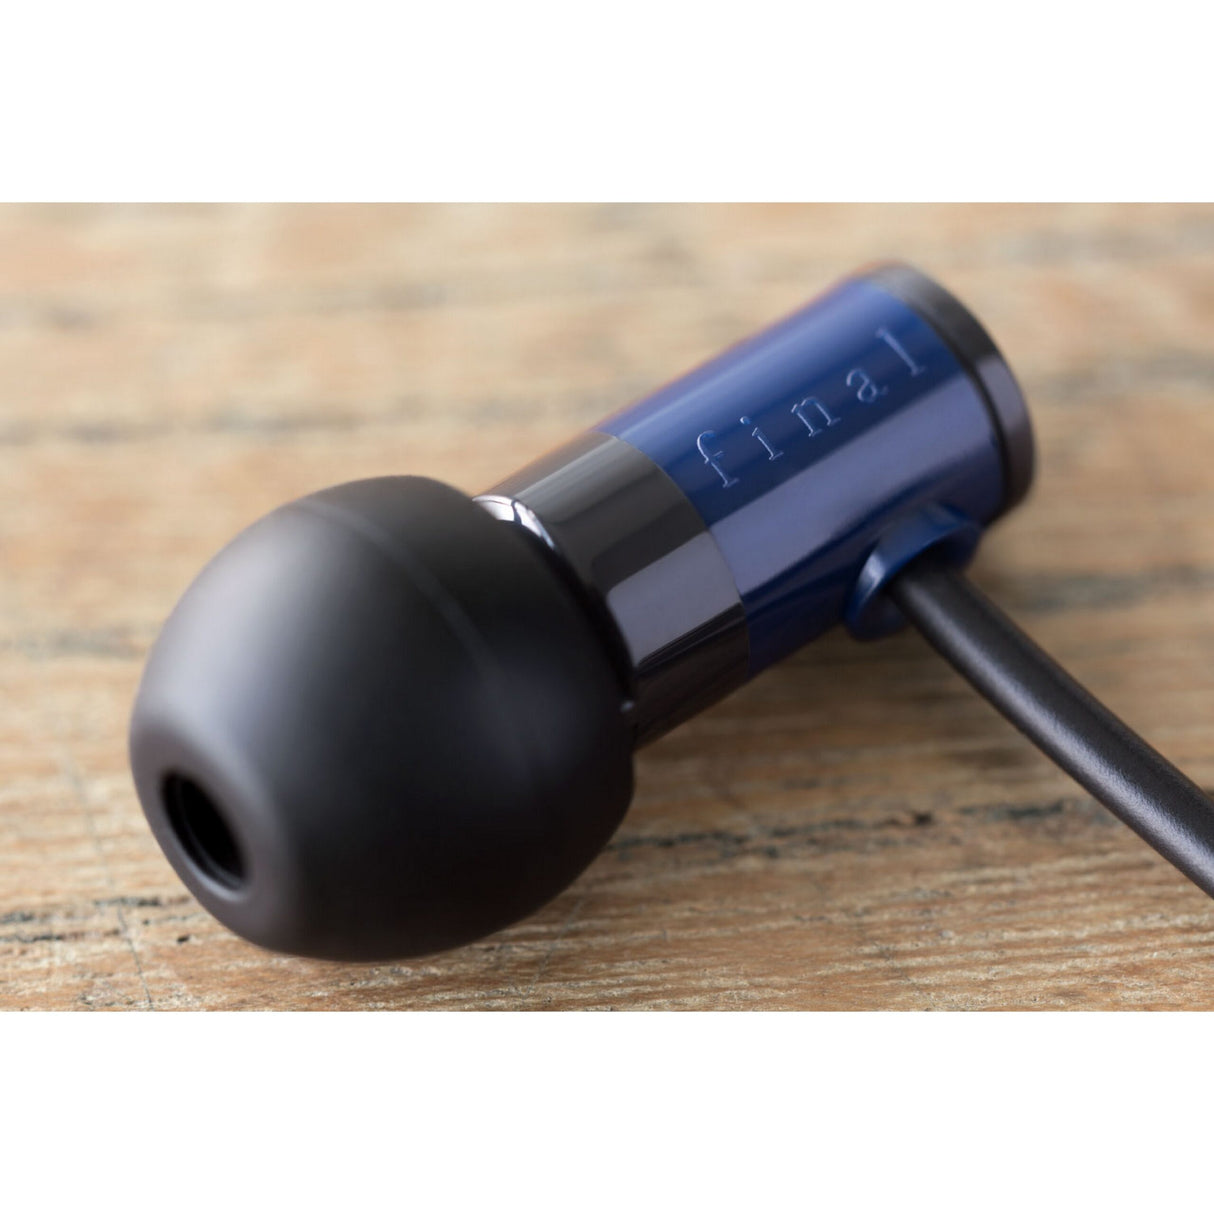 Final Audio E1000C In-Ear Noise Isolating Earphones with Microphone, Blue